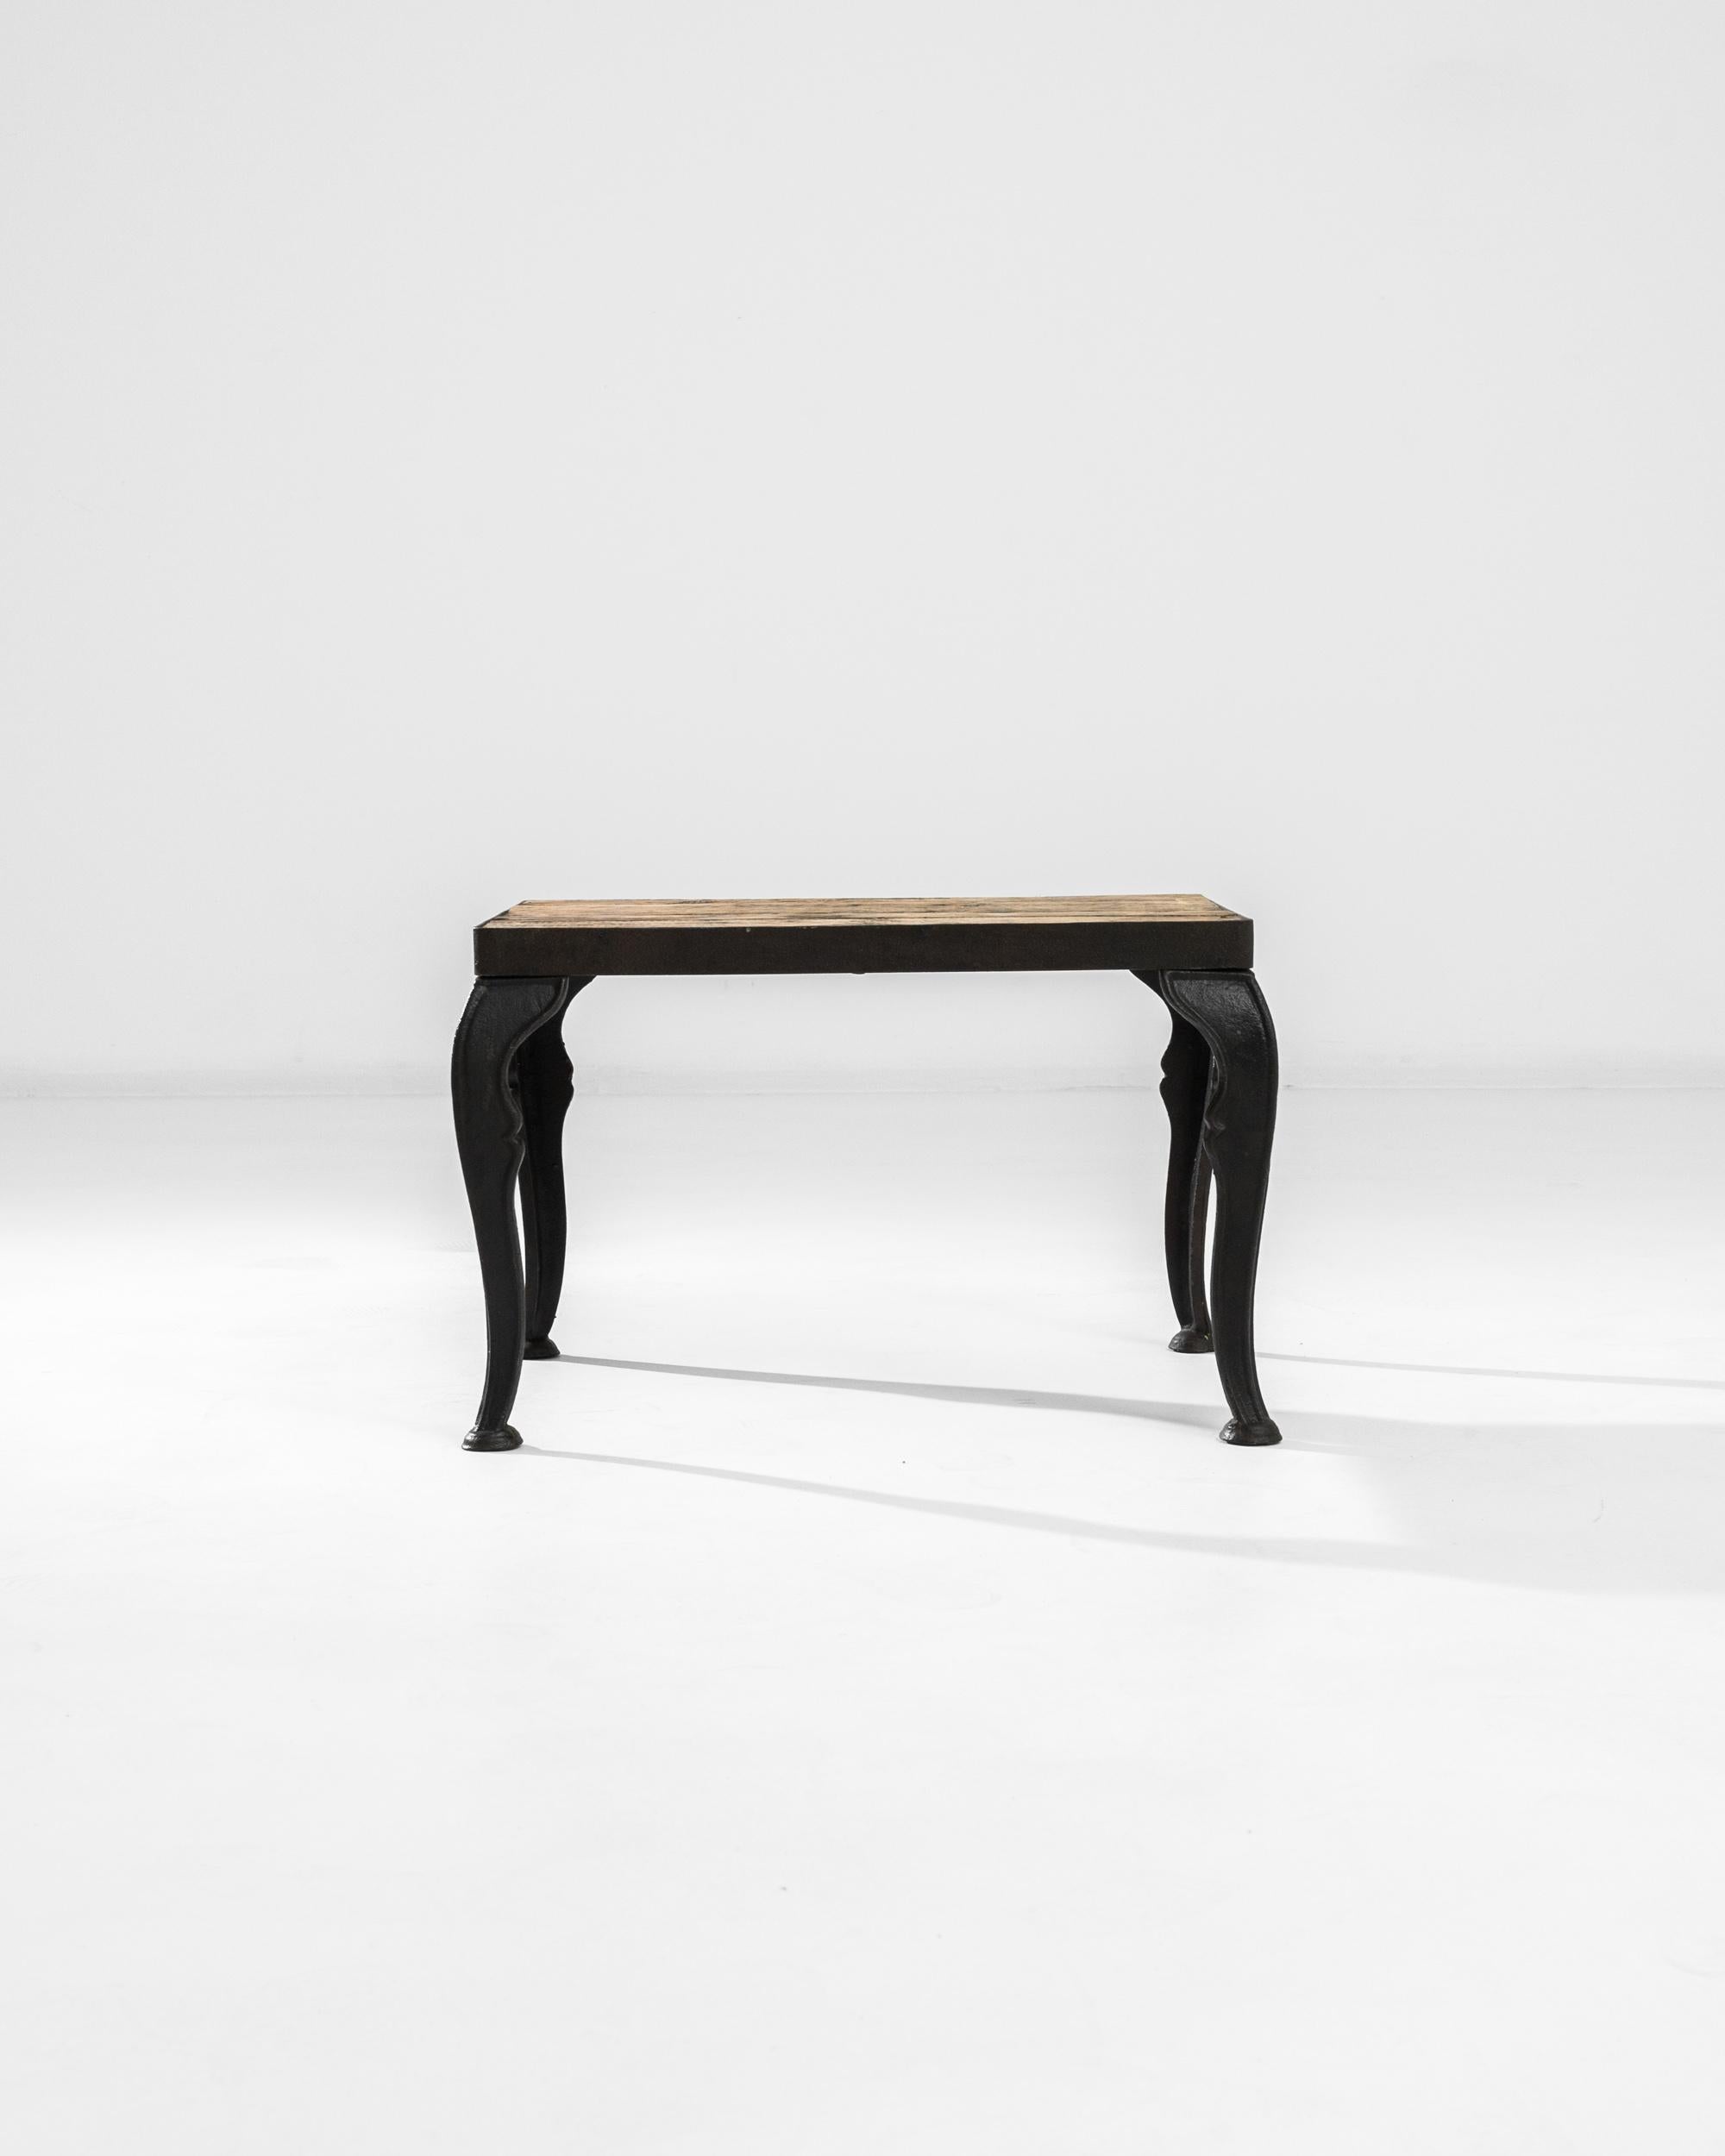 The unique design of this coffee table marries industrial and baroque aesthetics for a stimulating fusion. Made in Central Europe at the turn of the century, cabriole legs create a light and graceful silhouette, paradoxically realized in cast metal.